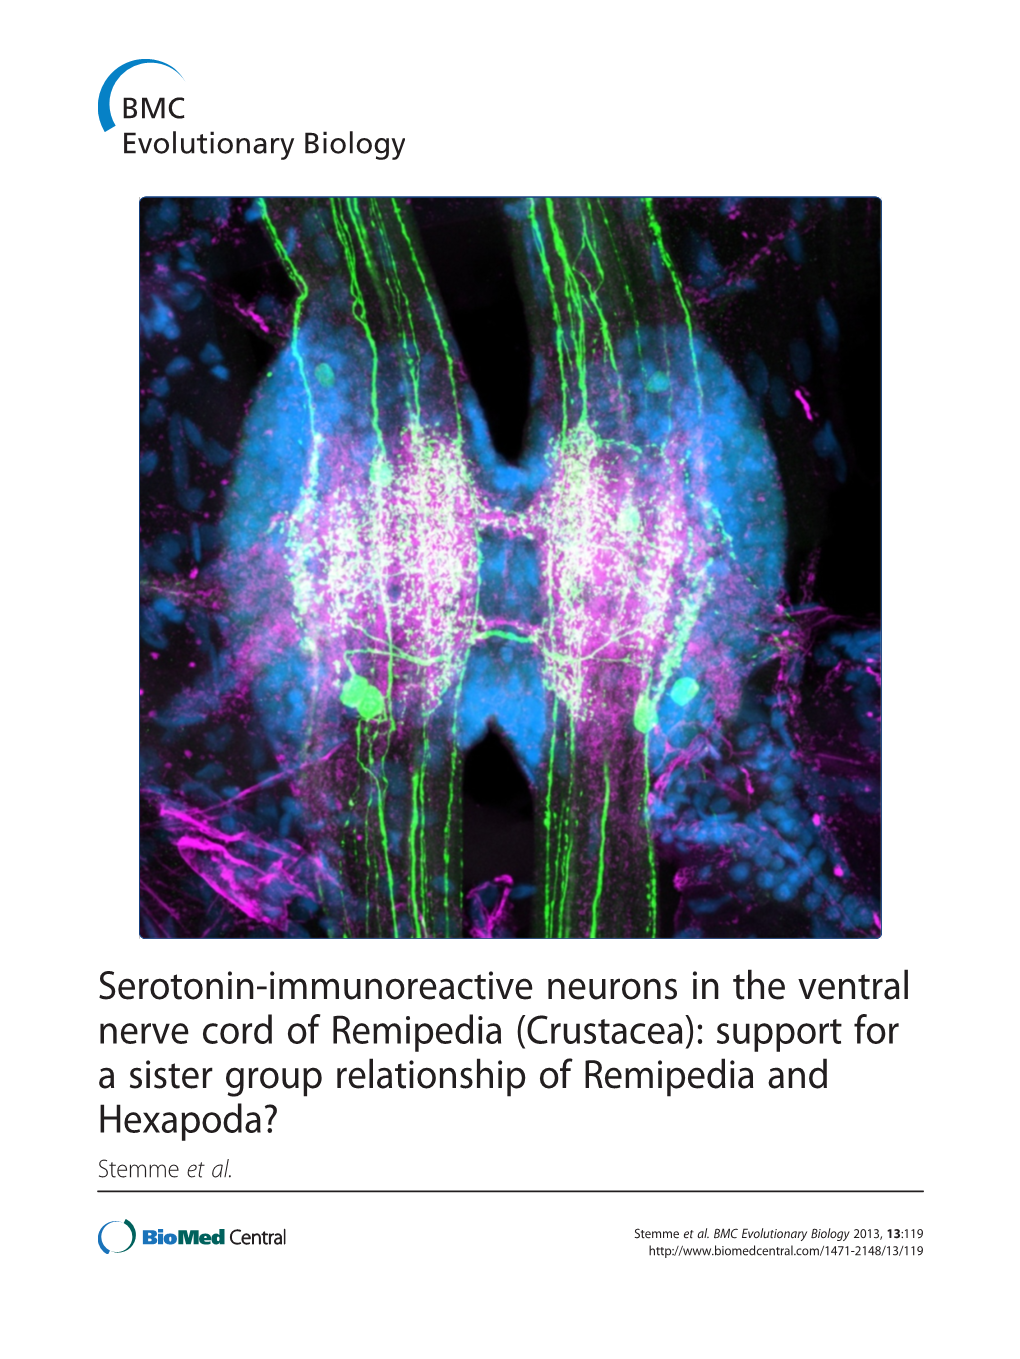 Serotonin-Immunoreactive Neurons in the Ventral Nerve Cord of Remipedia (Crustacea): Support for a Sister Group Relationship of Remipedia and Hexapoda? Stemme Et Al